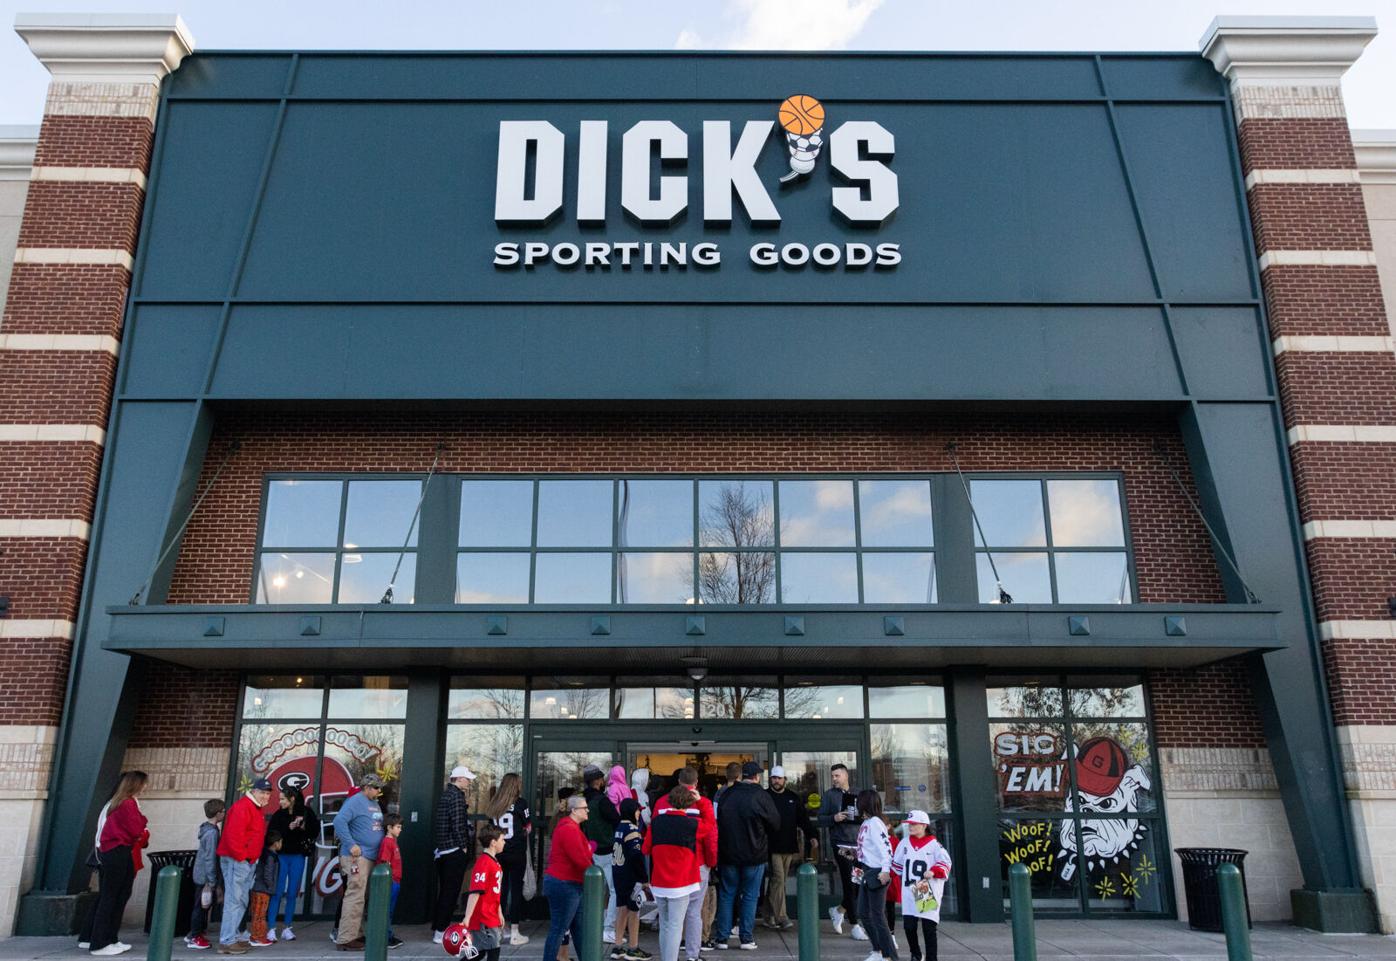 Dick's Sporting Goods opens early for eager fans to get Bruins gear